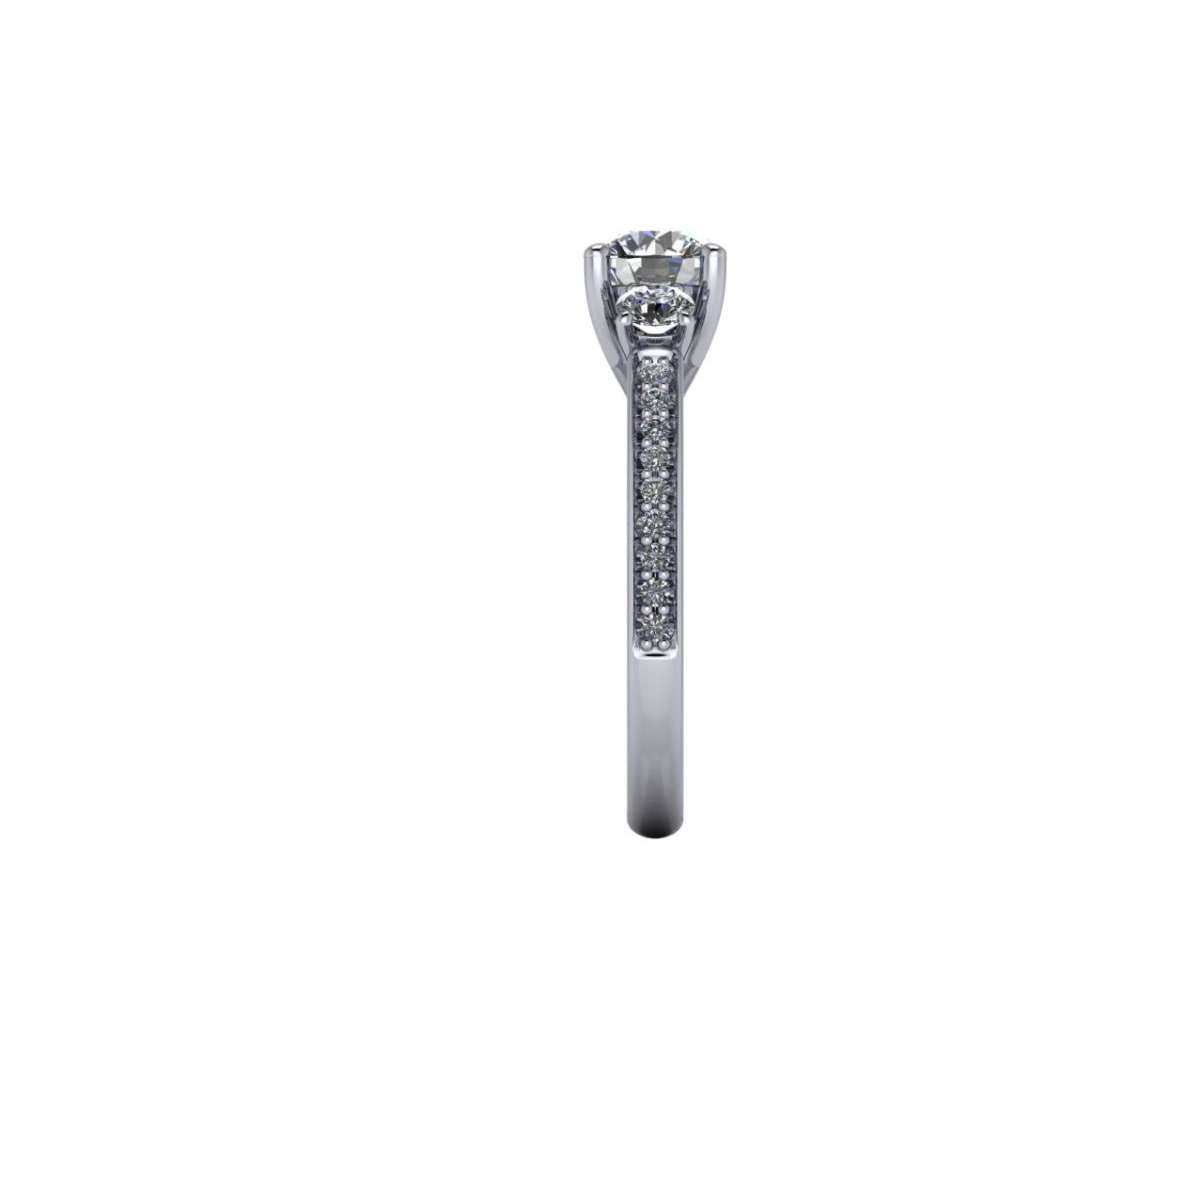 Trilogy ring in platinum 1.50 carats diamonds GIA certified G-IF